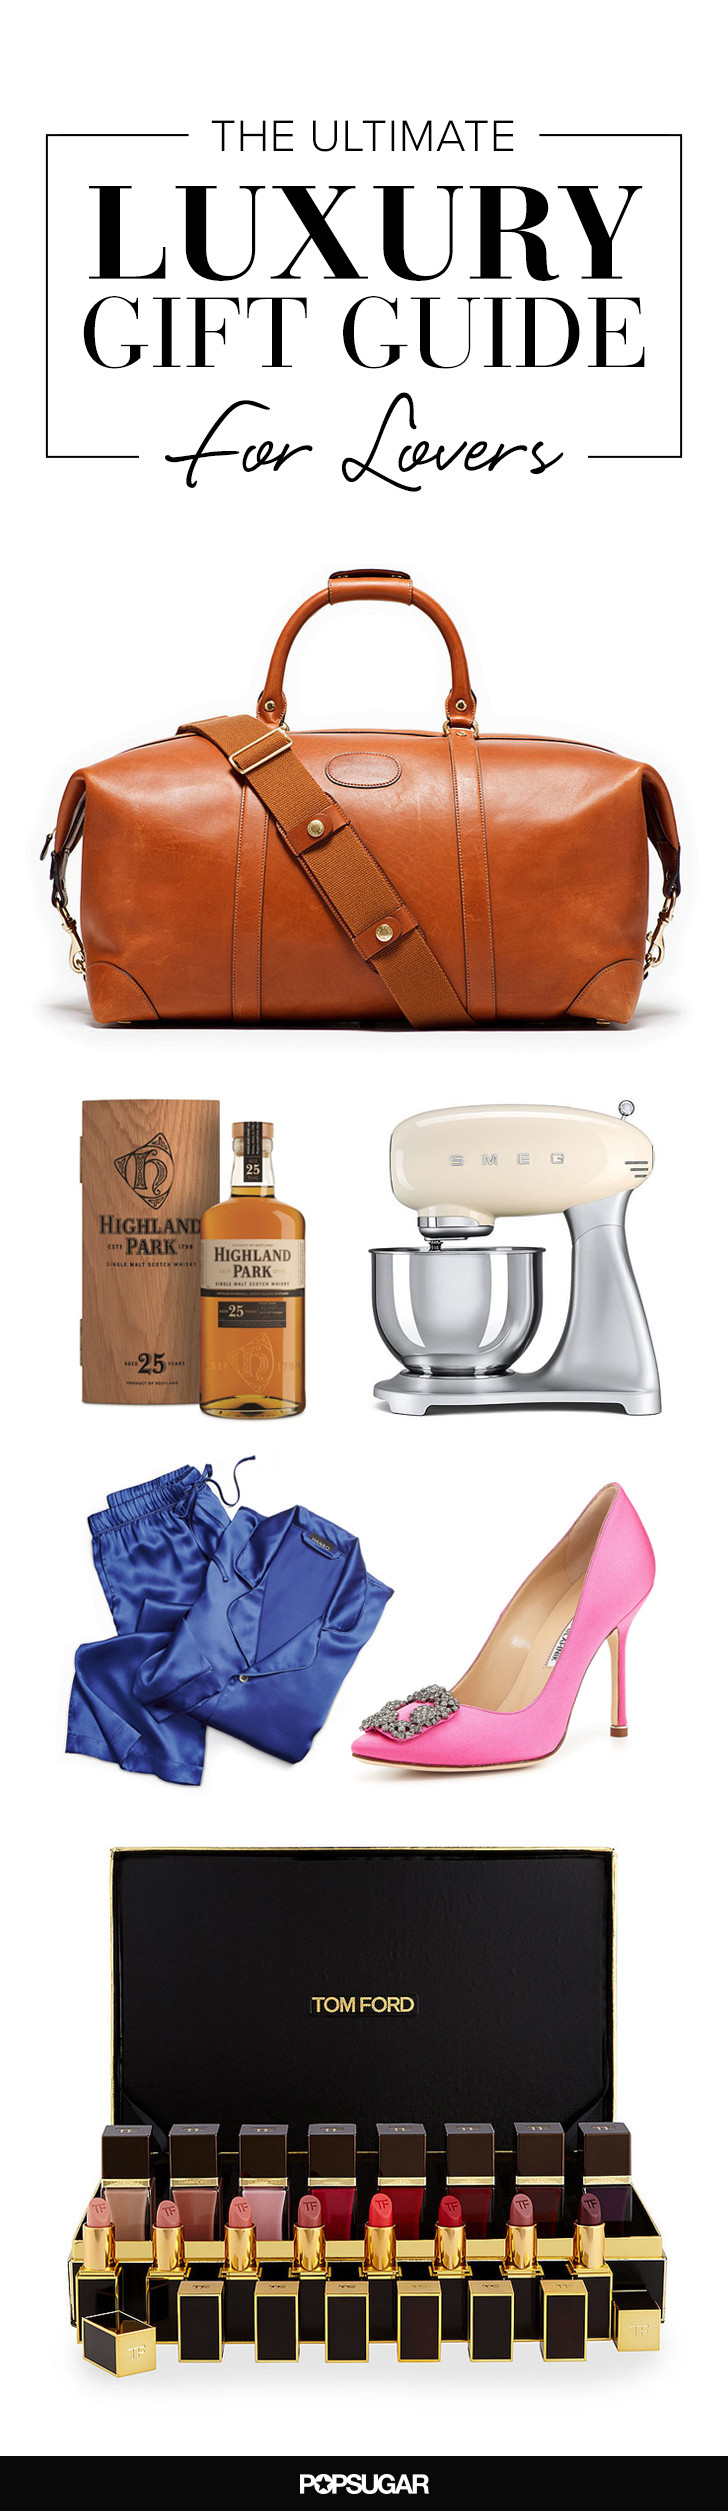 Expensive Gift Ideas For Boyfriend
 The Ultimate Luxury Gift Guide For Lovers